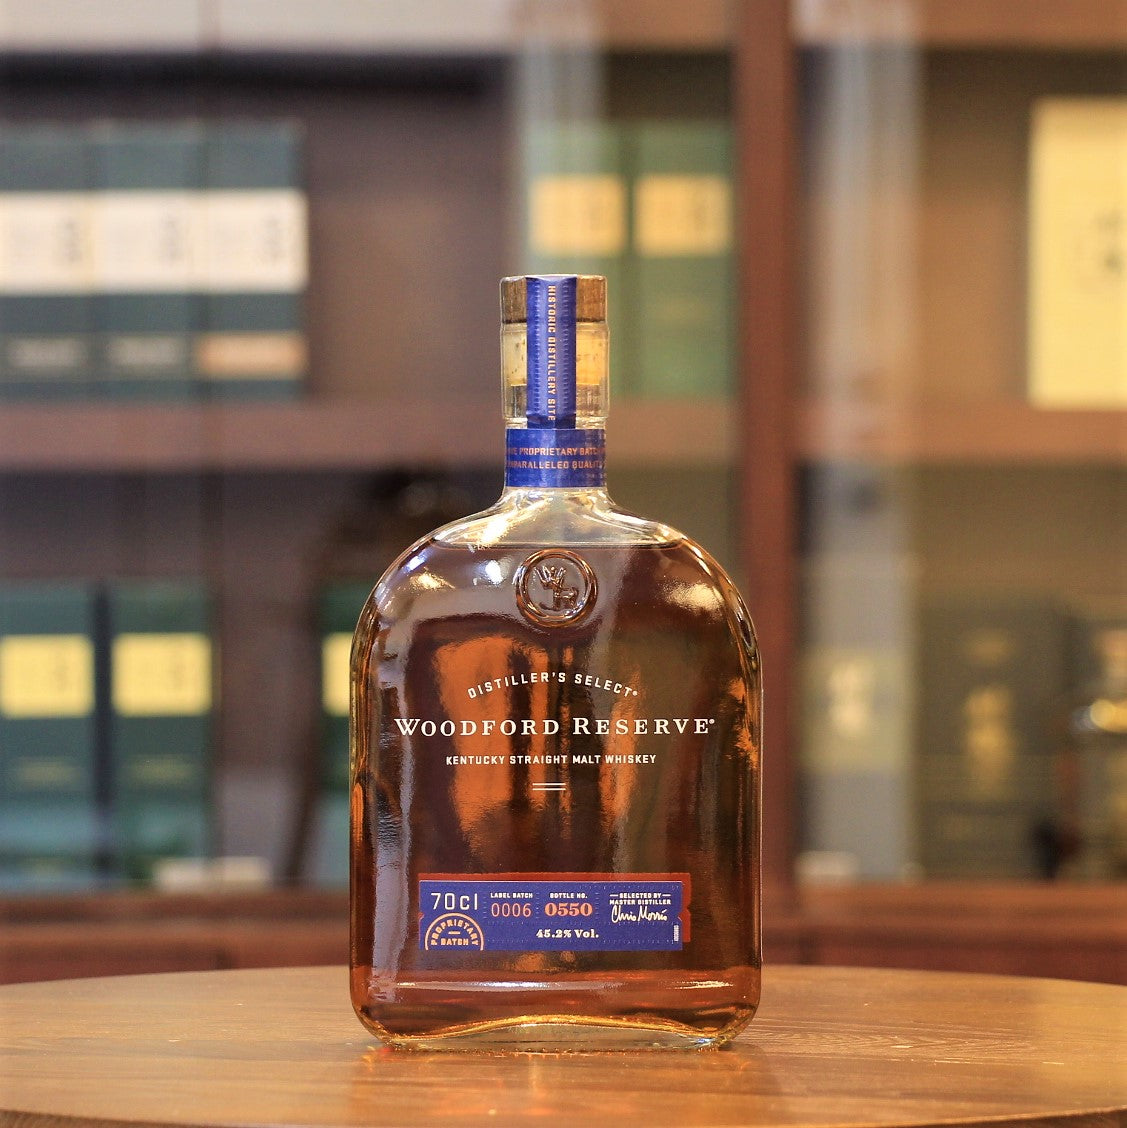 This unique kentucky straight malt whiskey has a soft, sweet, nutty character. Unlike a typical 100% malt whiskey, This whiskey is crafted from 51% malt and aged in new charred oak barrels, making it similar to bourbon and providing a new experience for bourbon drinkers.